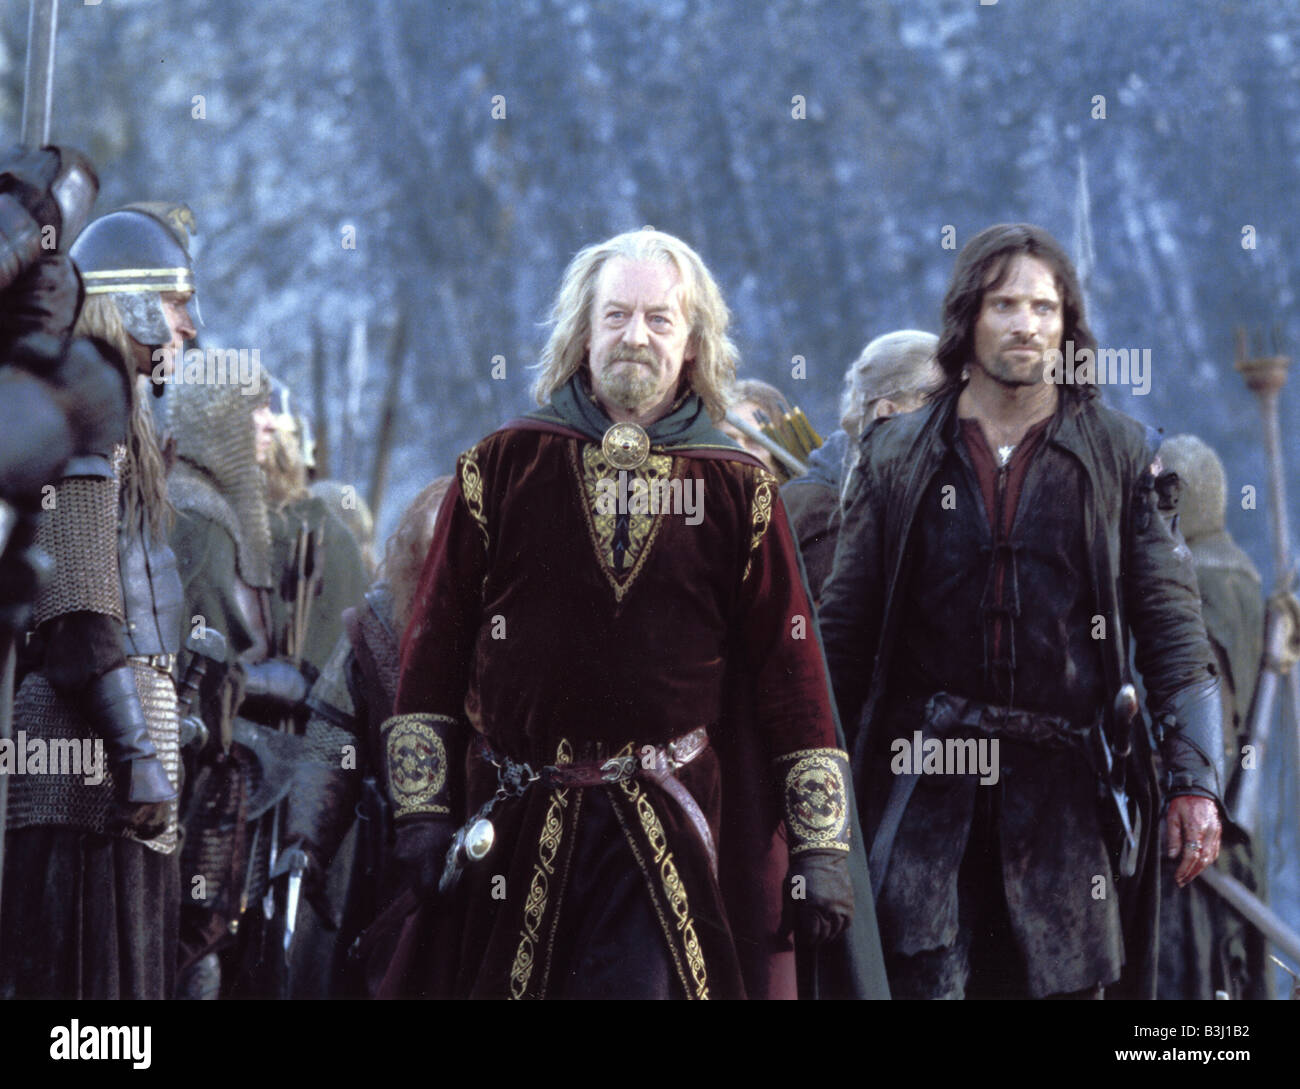 LORD OF THE RINGS : THE TWO TOWERS 2002 Entertainment/New Line film with Bernard Hill and Viggo Mortensen at right Stock Photo